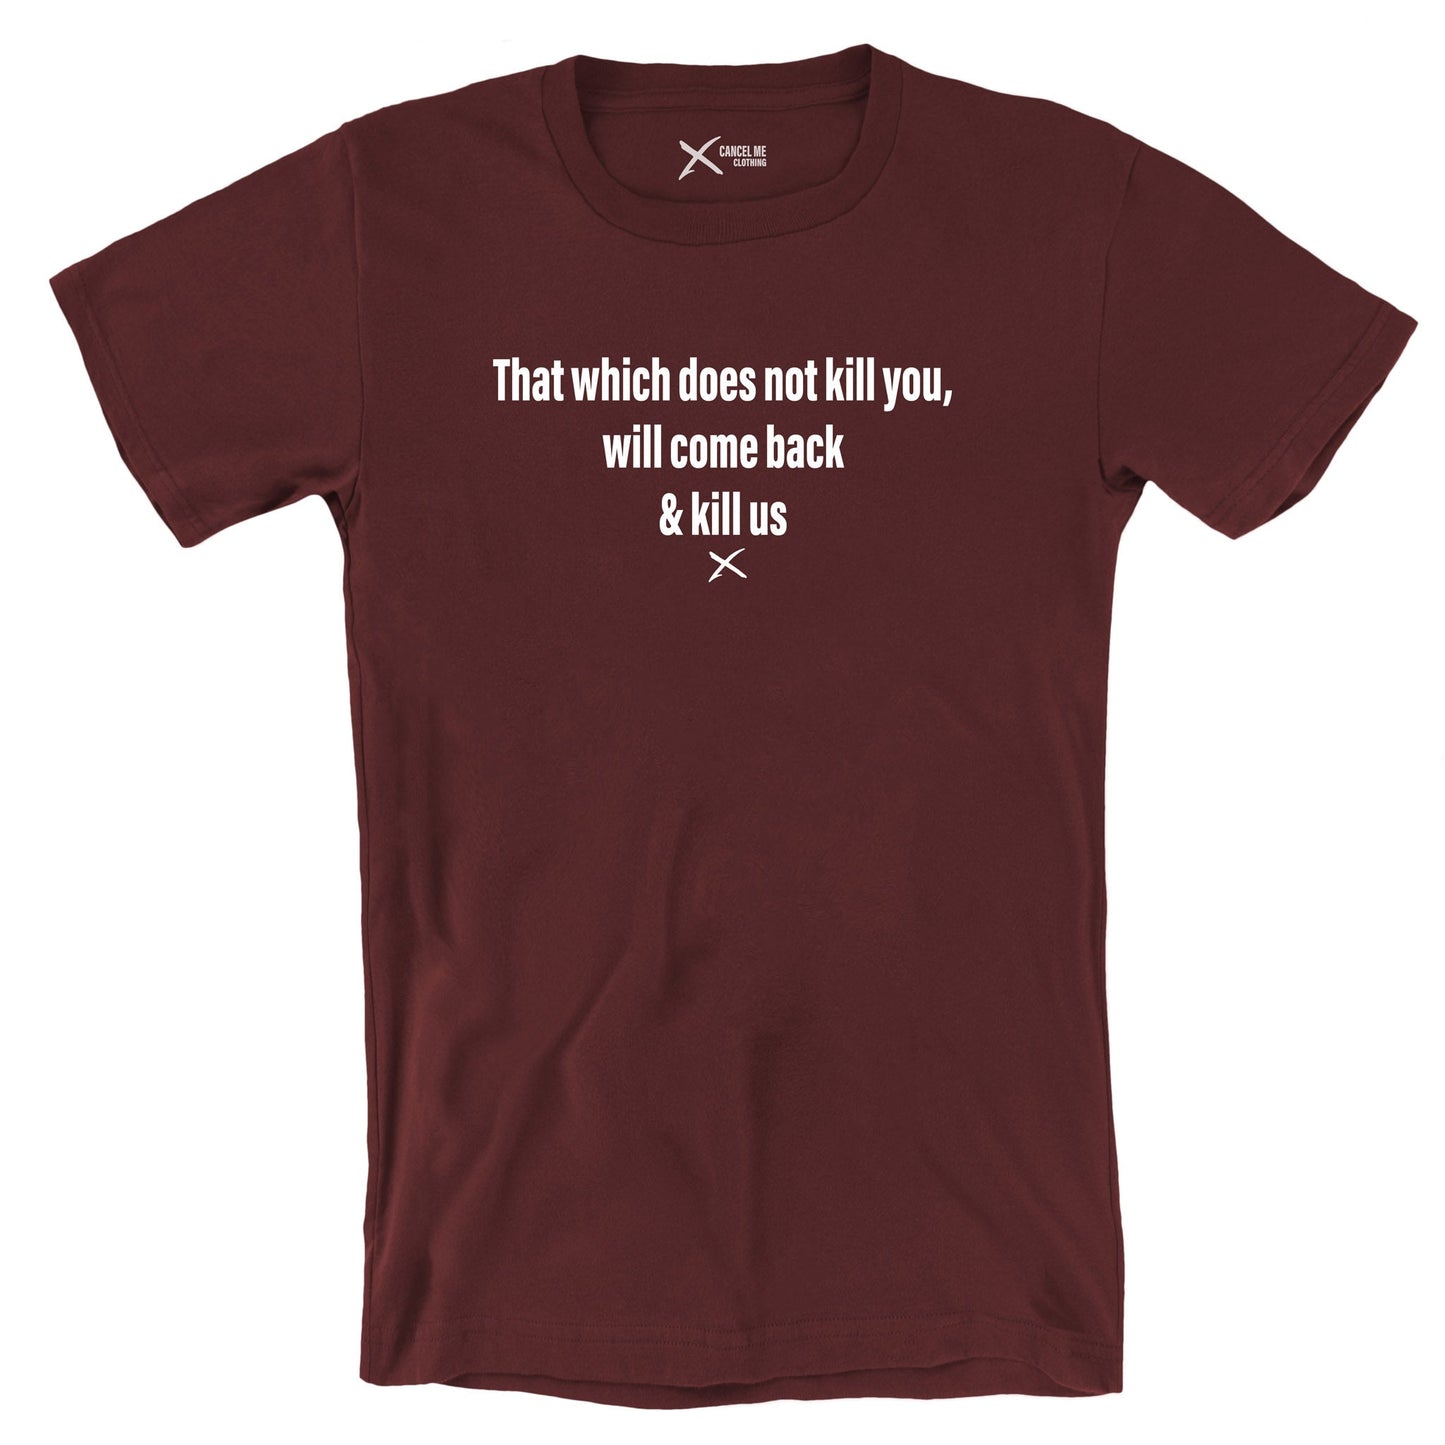 That which does not kill you, will come back & kill us - Shirt